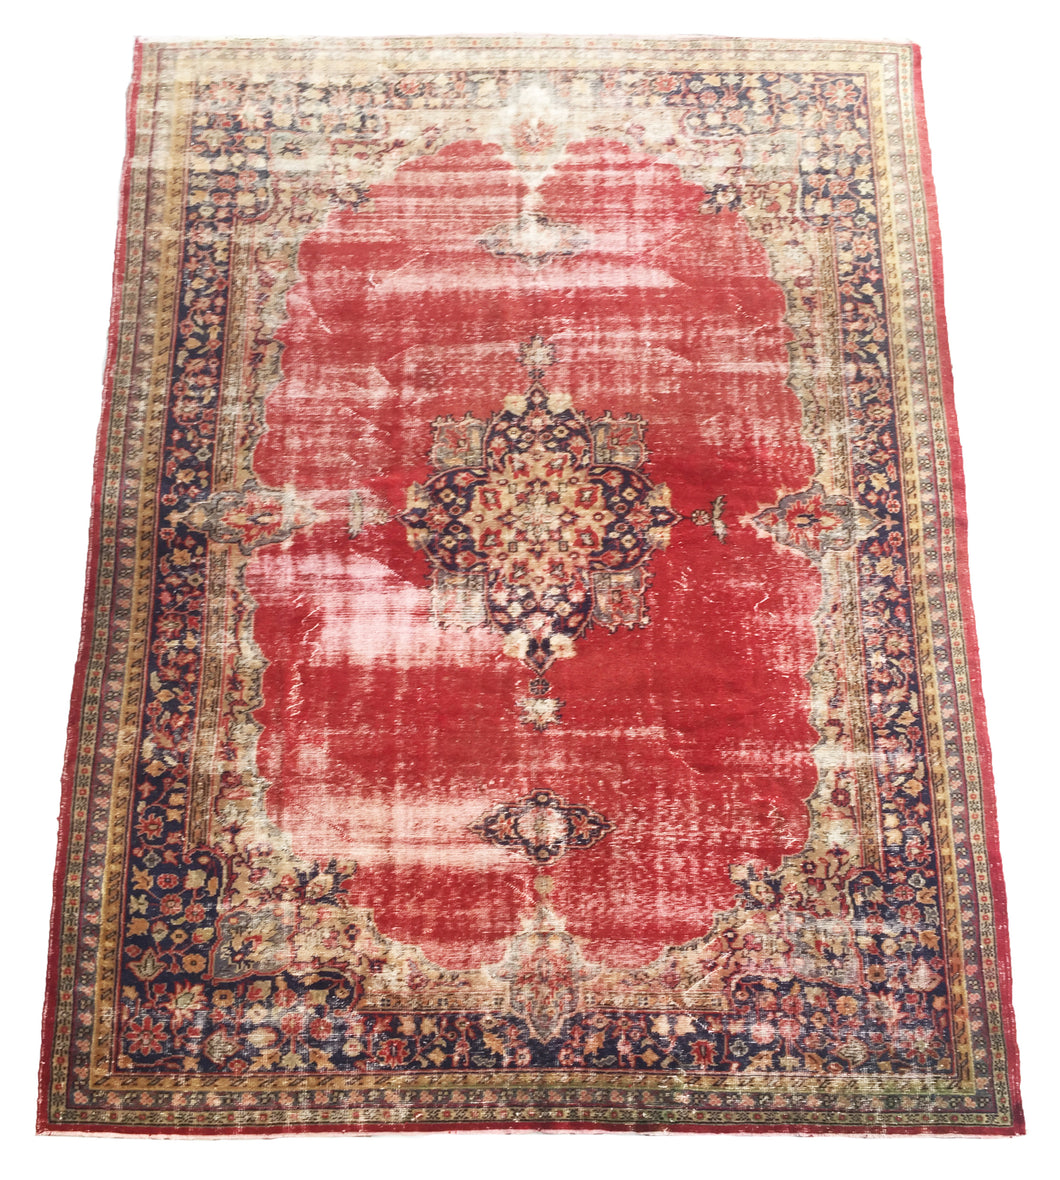 8x11 Vintage Western Anatolian Oushak Style 'Demirci' Turkish Area Rug | Intricate Medallion Spacious Field Muted Colors Floral Border  | SKU 203